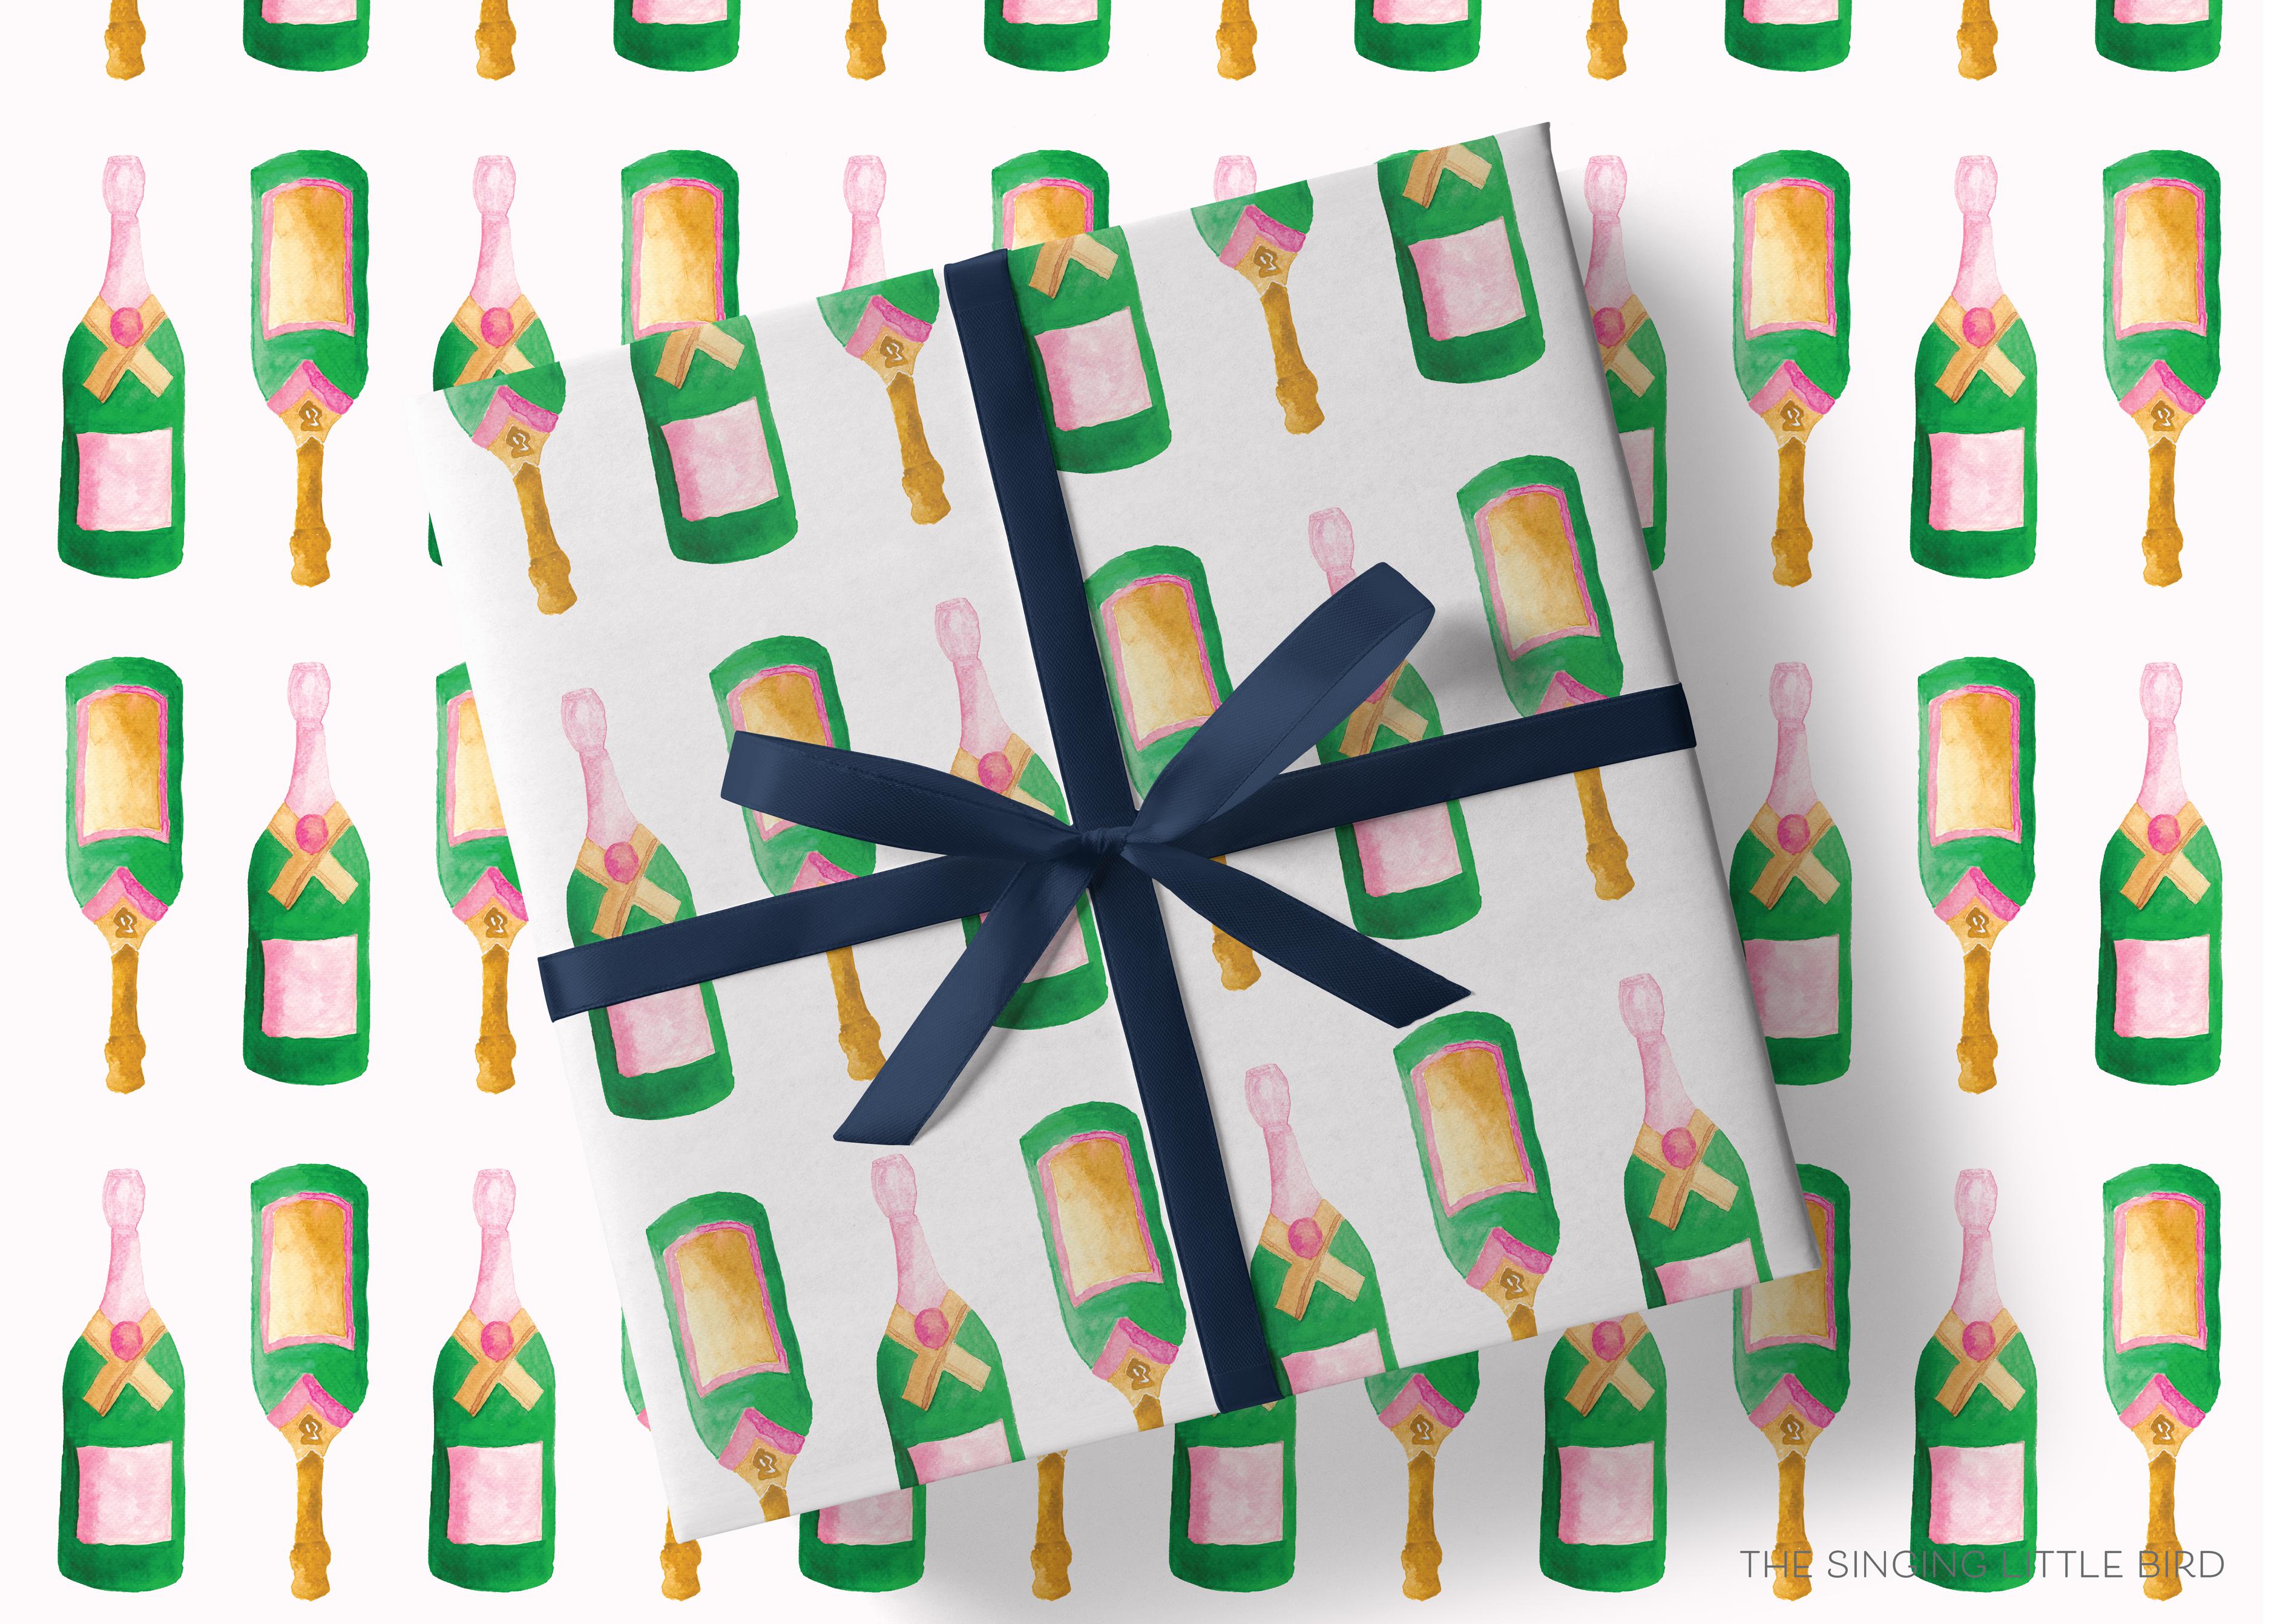 Champagne Bottle Gift Wrap-This matte finish gift wrap features our hand-painted watercolor champagne bottles. It makes a perfect wrapping paper for any celebration present. -The Singing Little Bird